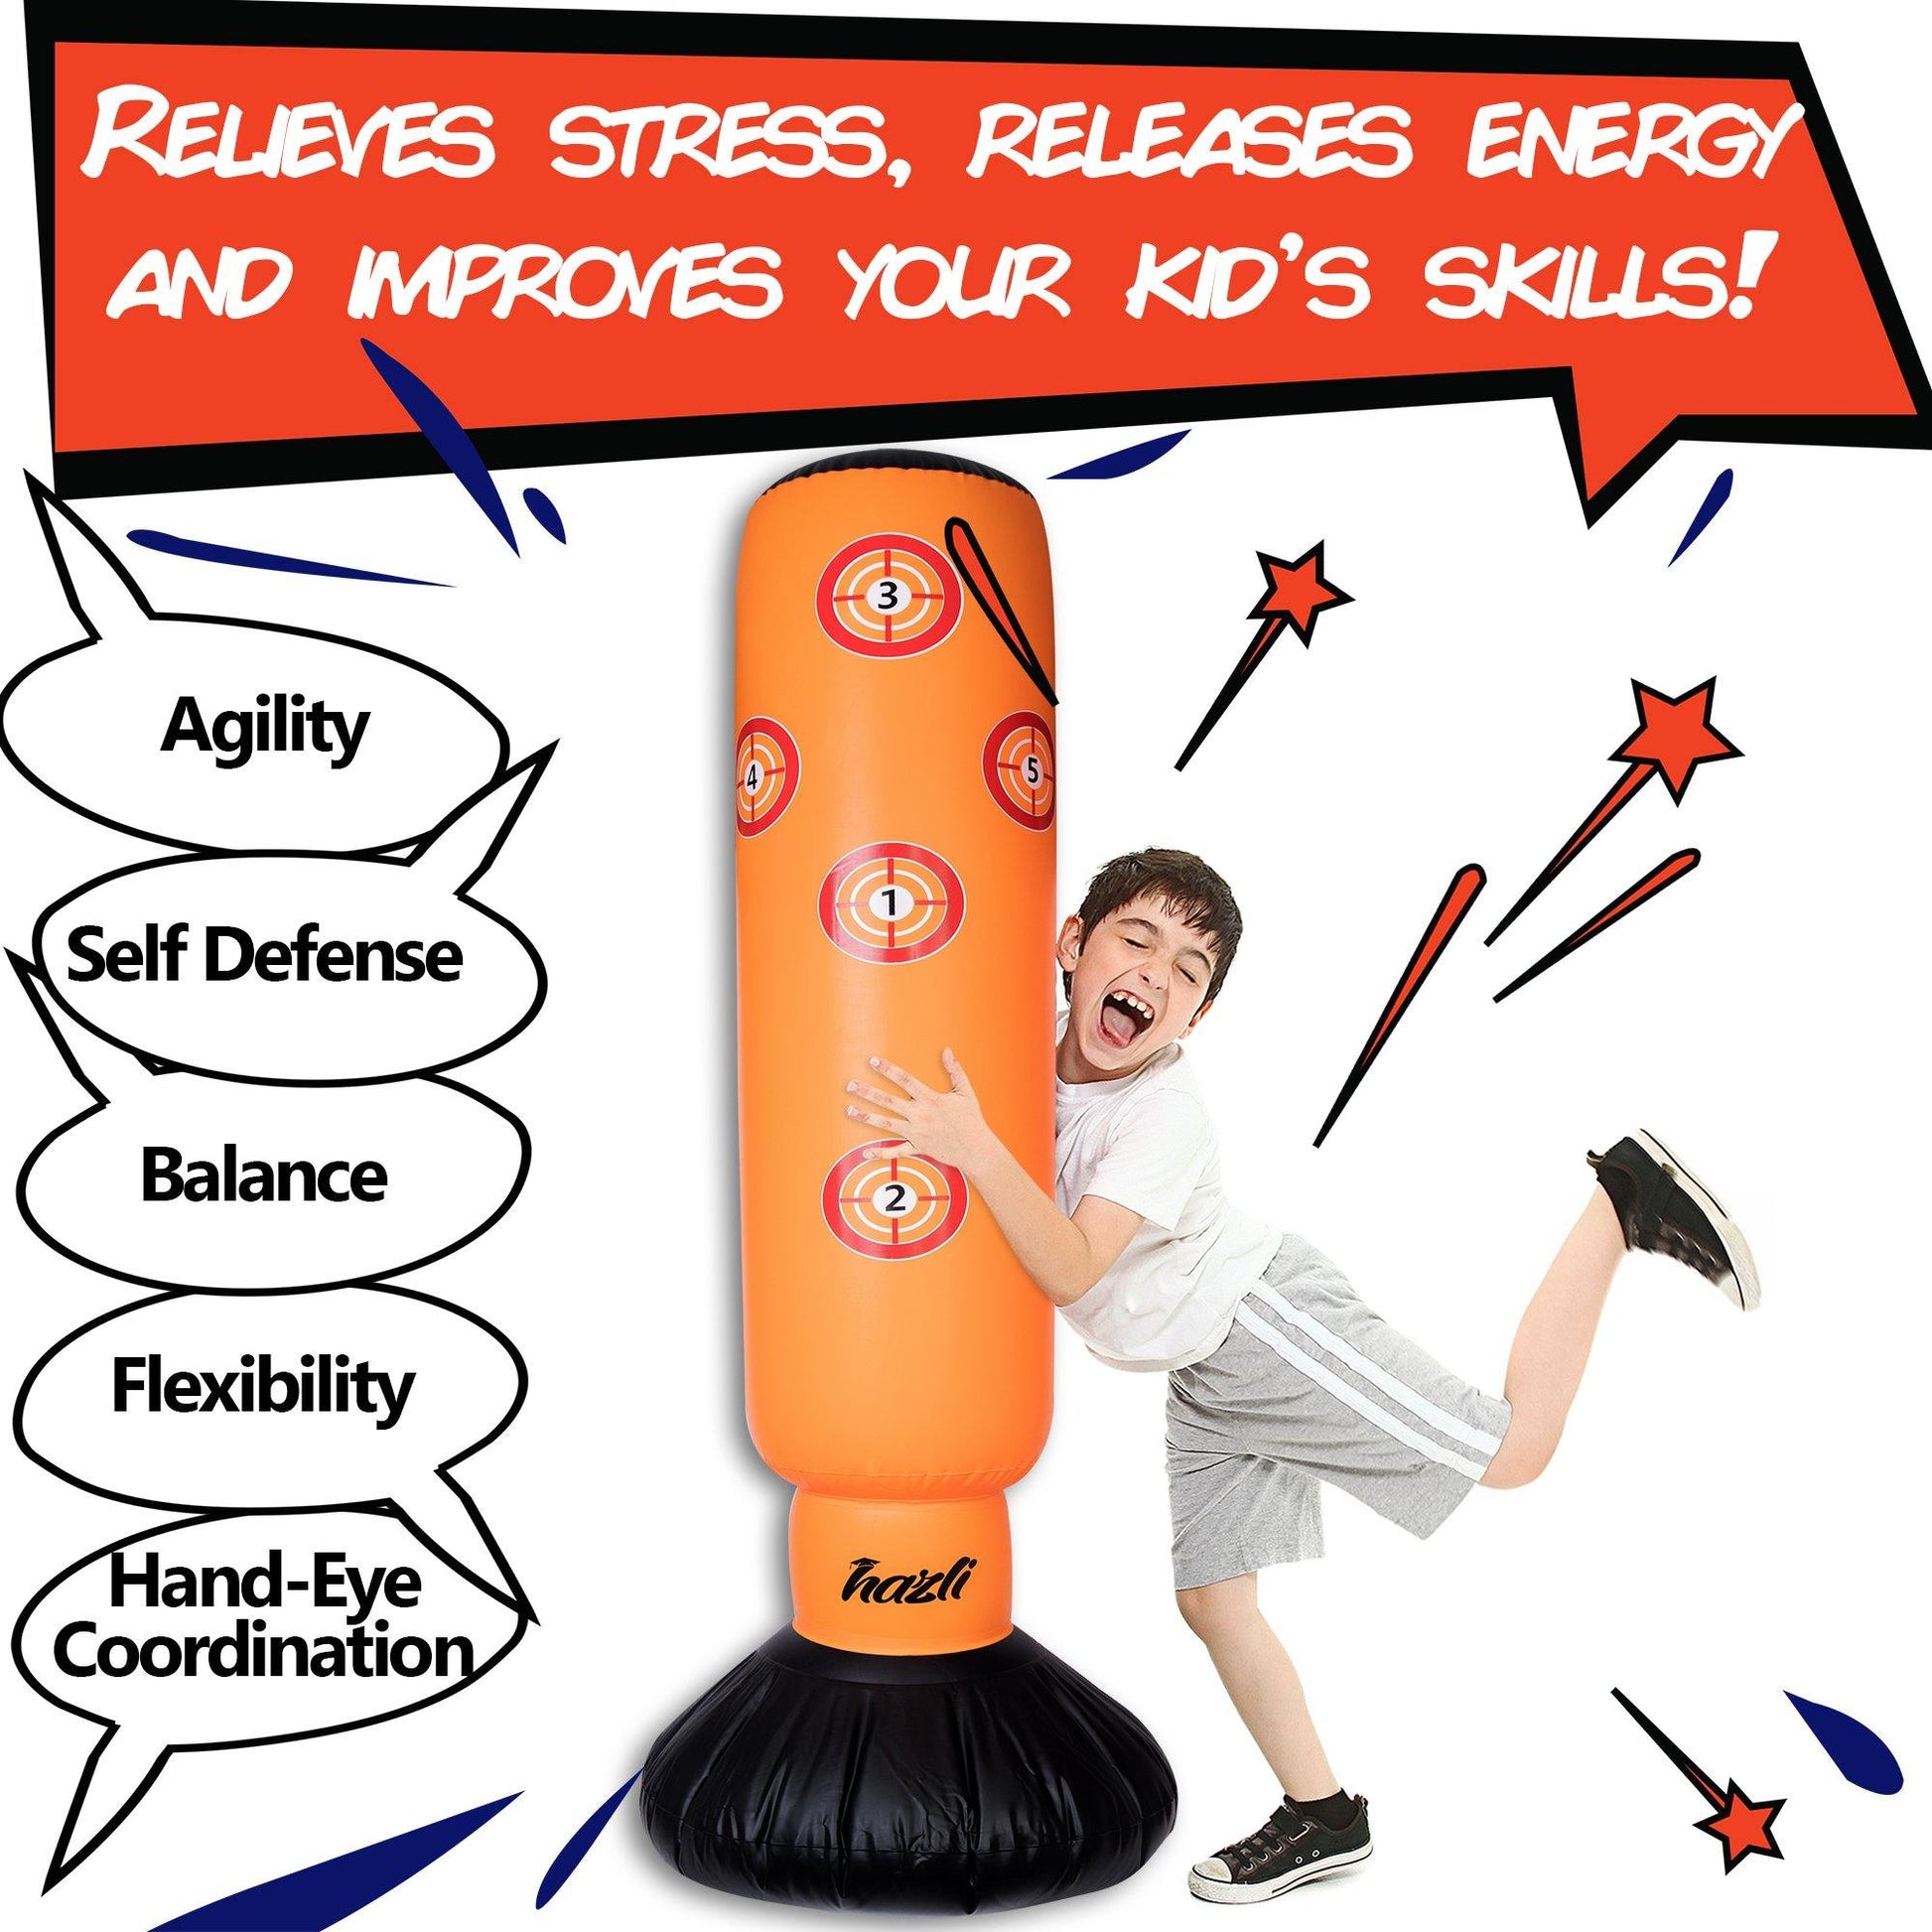 Inflatable Punching Bag for Kids with Bounce-Back Effect - Hazli Collection 